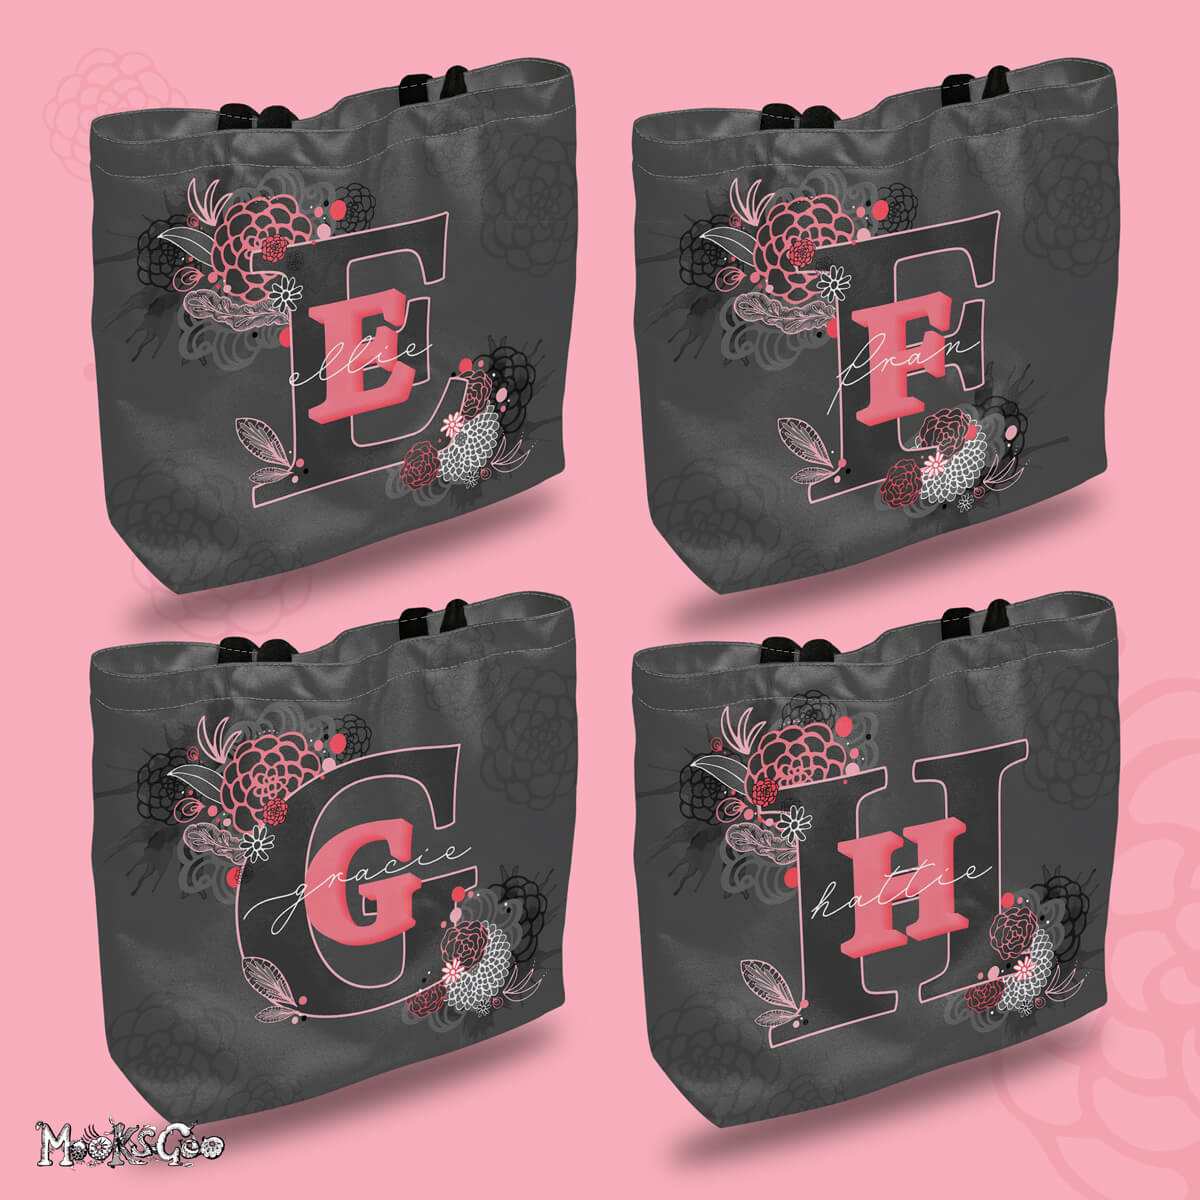 Personalised tote bag for women, toddlers, school age children, with letters E for Ellie, F for Fran, G for Gracie, and H for Hattie